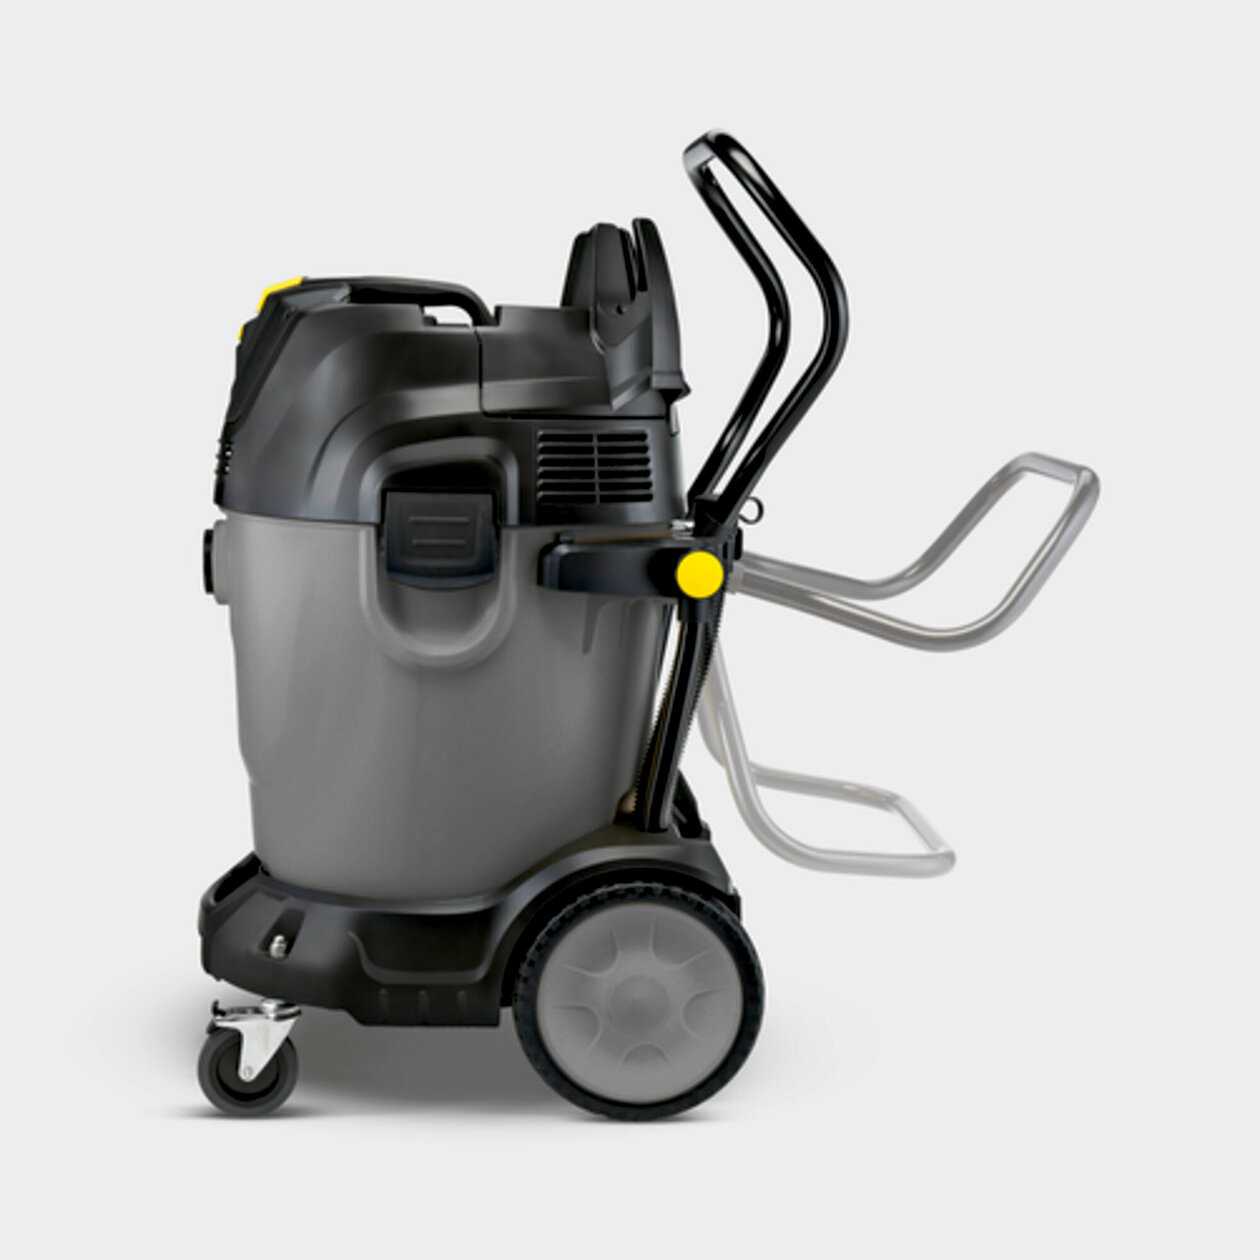 Wet and dry vacuum cleaner NT 65/2 Tact²: Easy transport